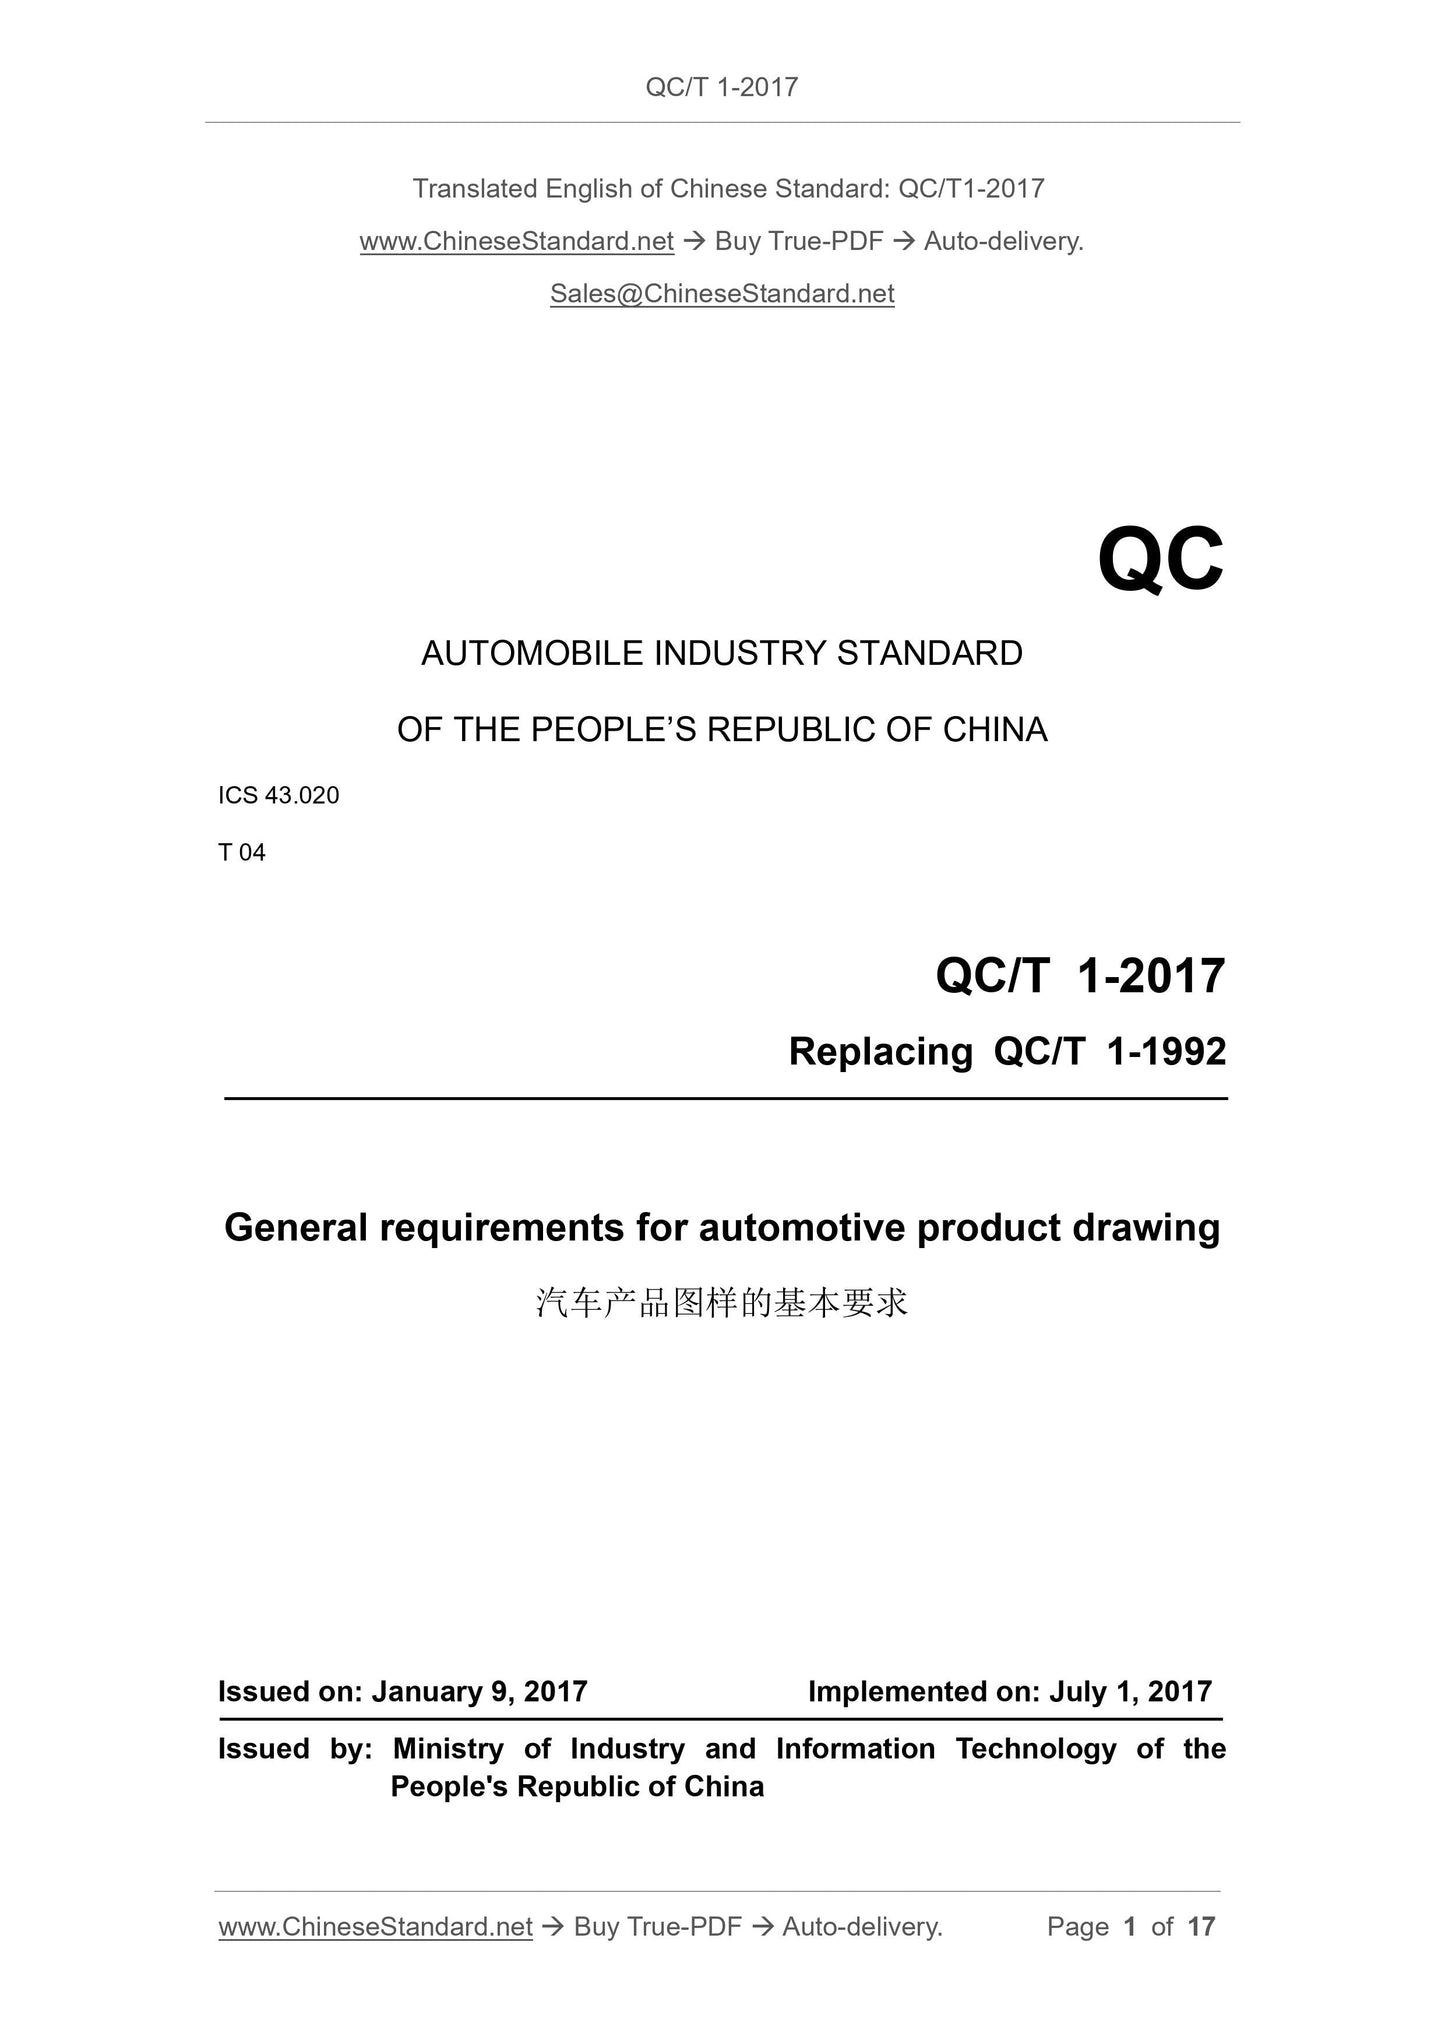 QC/T 1-2017 Page 1